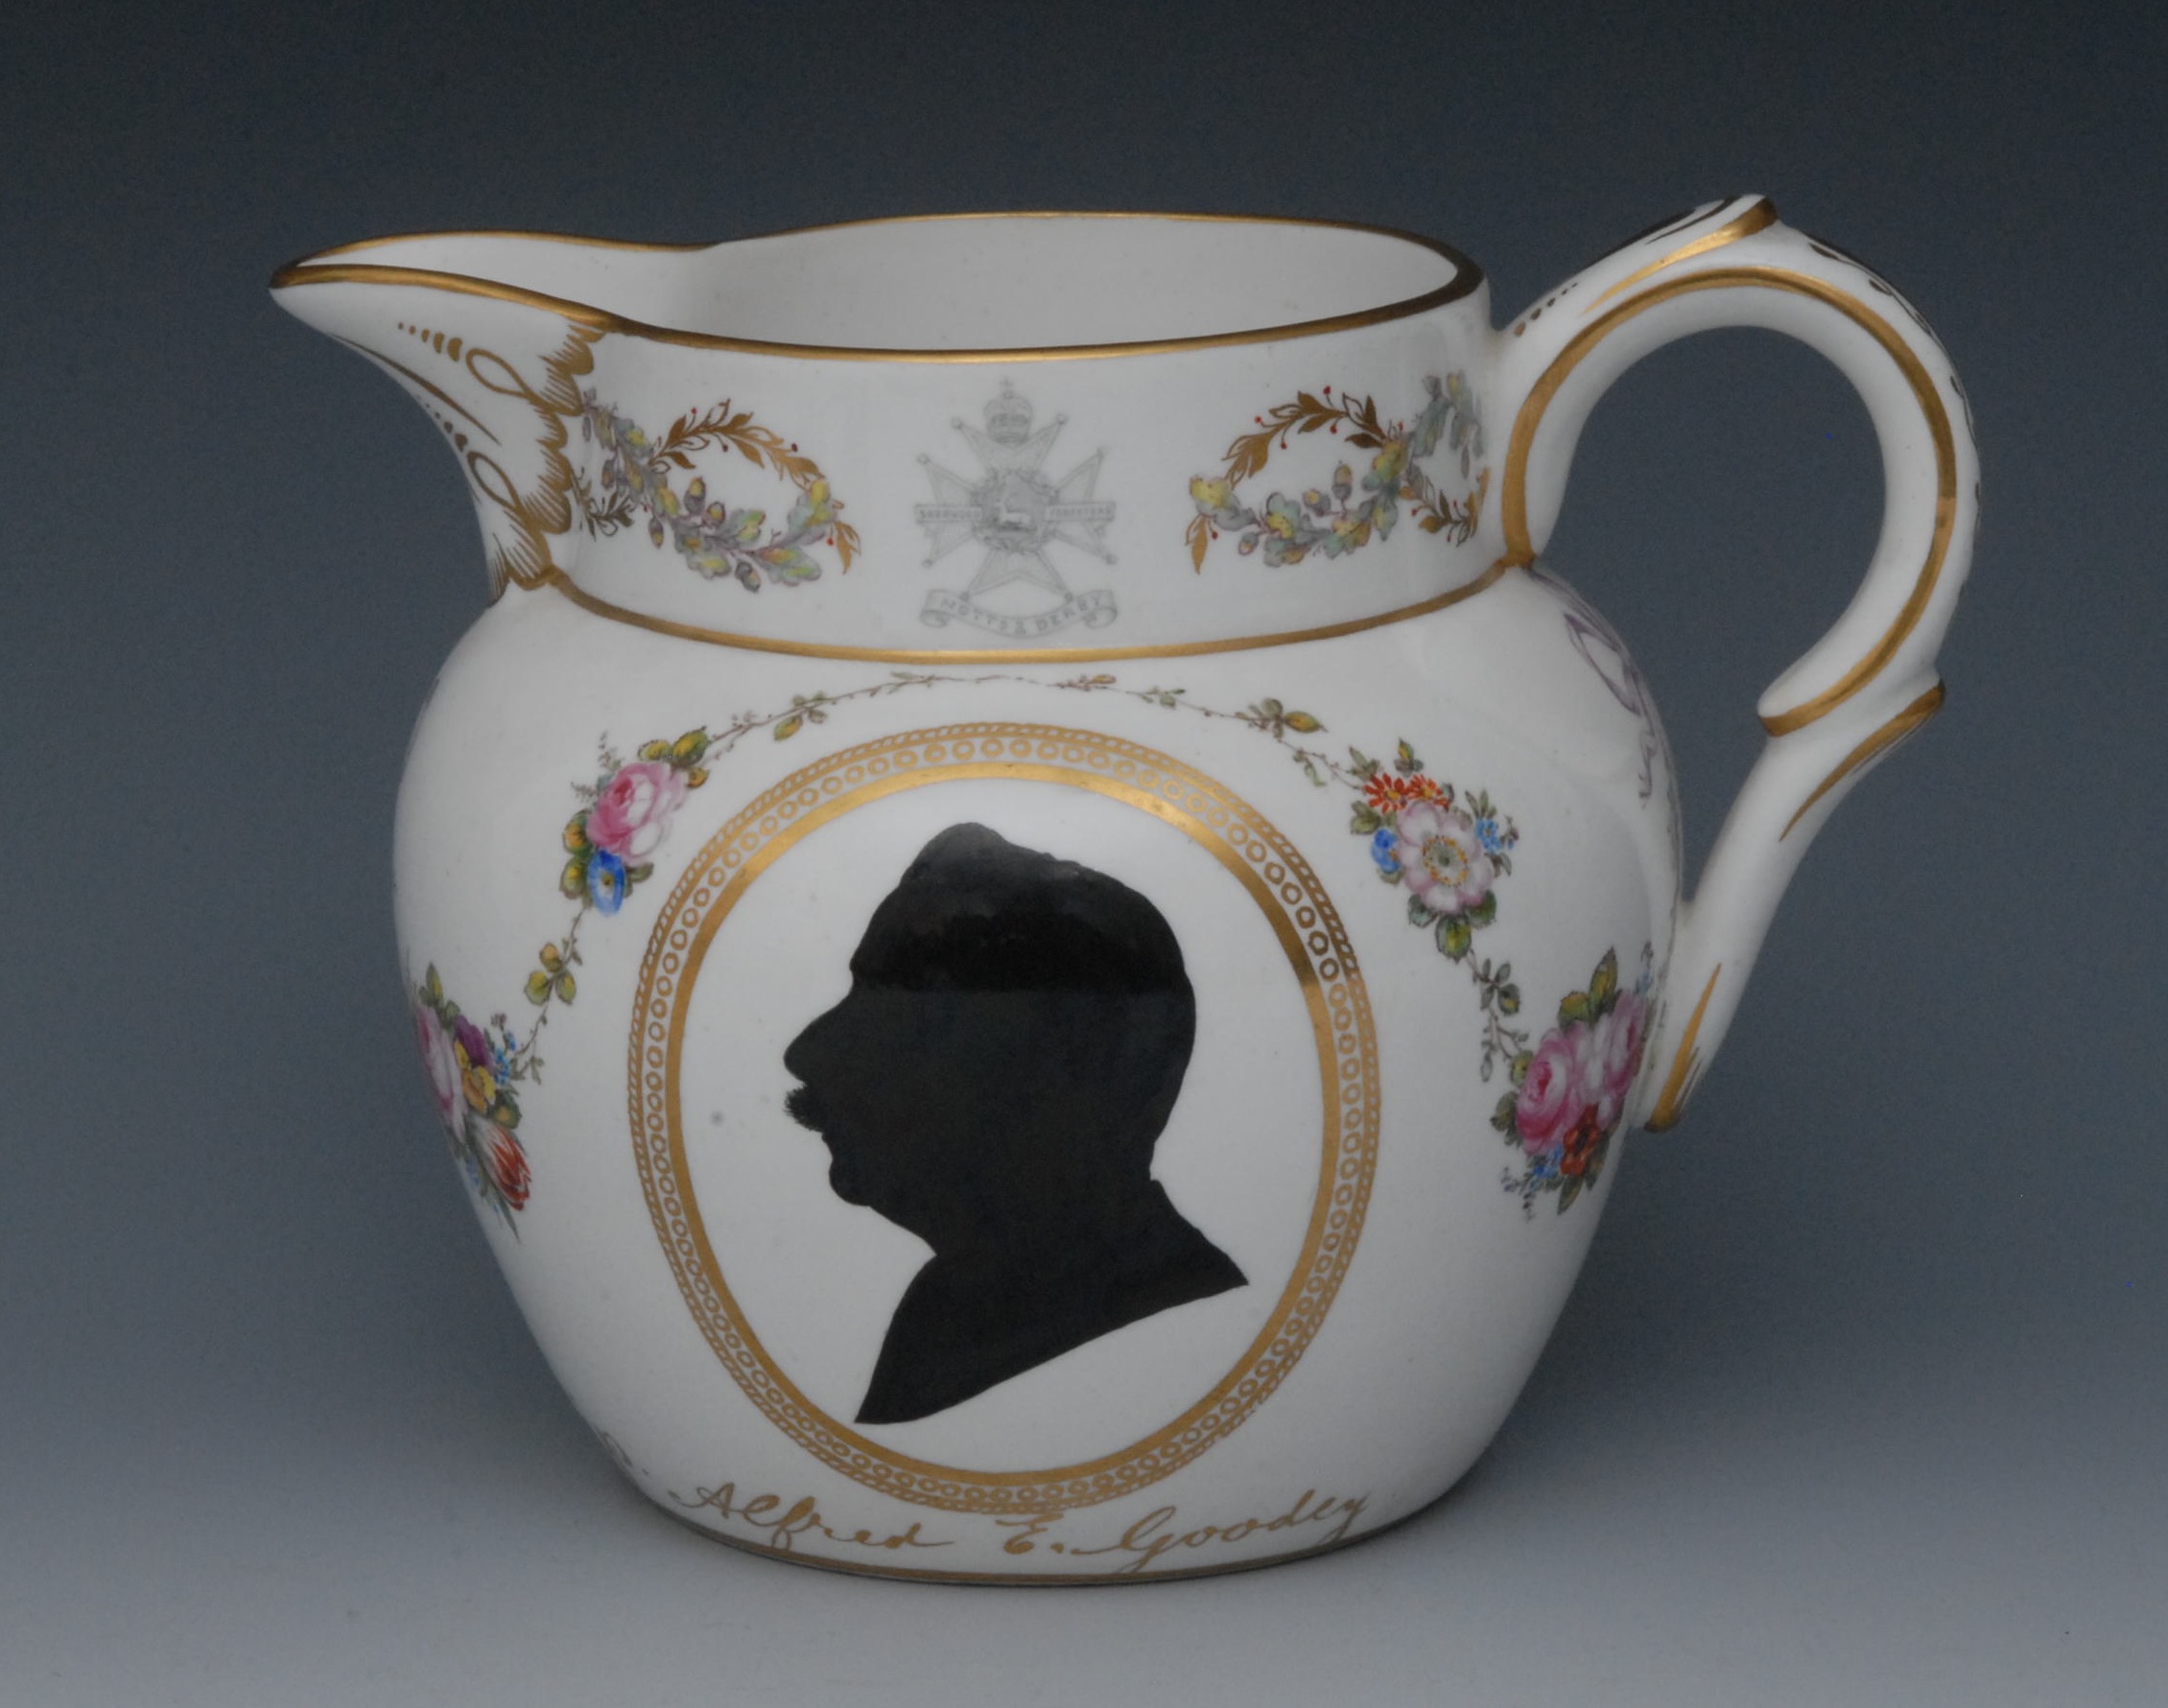 A Sampson Hancock silhouette jug, painted by William Mosley, signed, with two portrait cartouches of